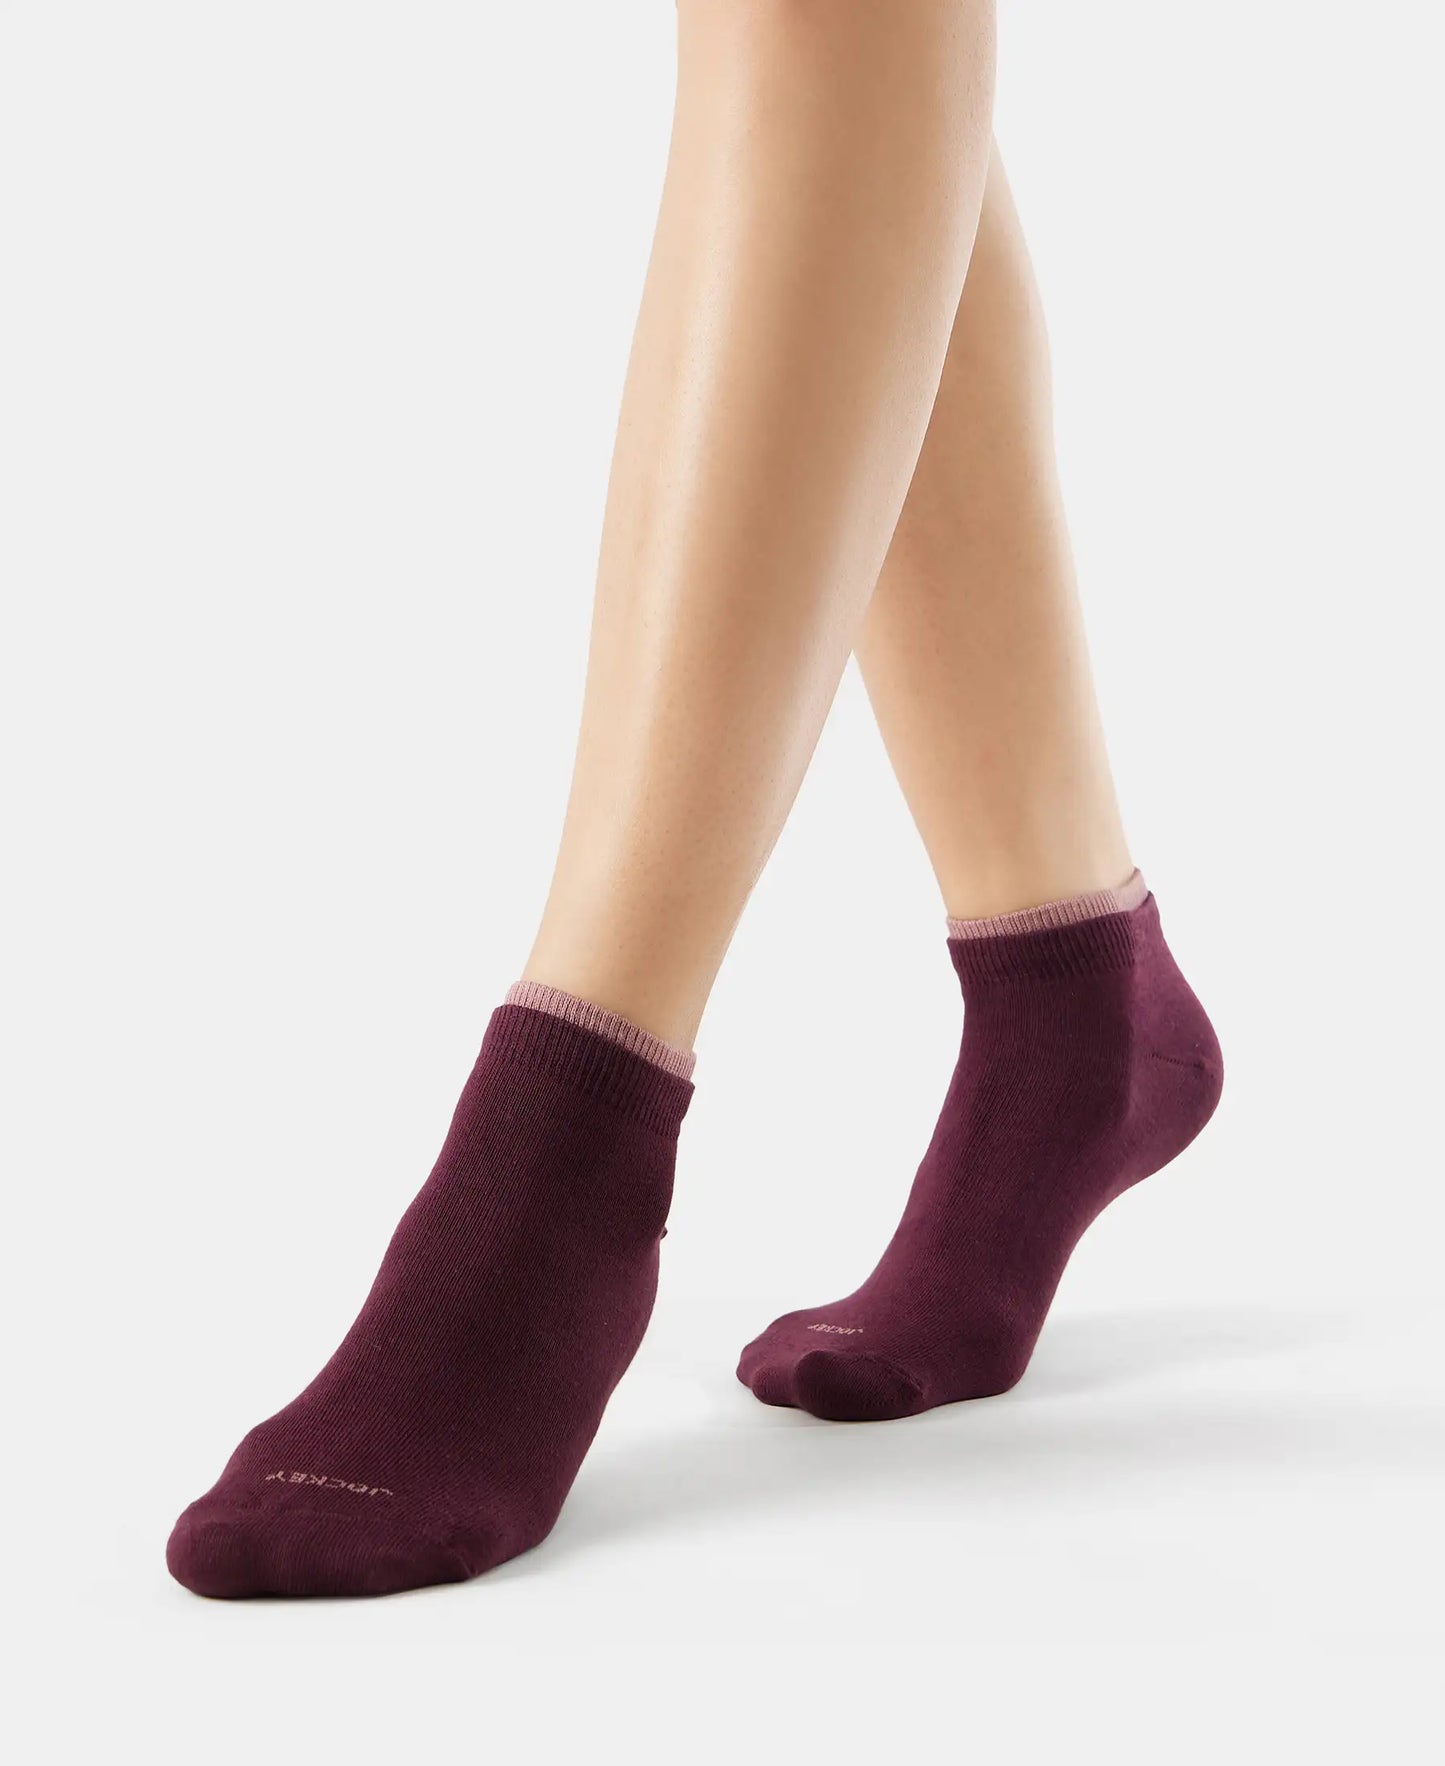 Compact Cotton Stretch Solid Low Show Socks with StayFresh Treatment - Wistful mauve & Wine Tasting-6